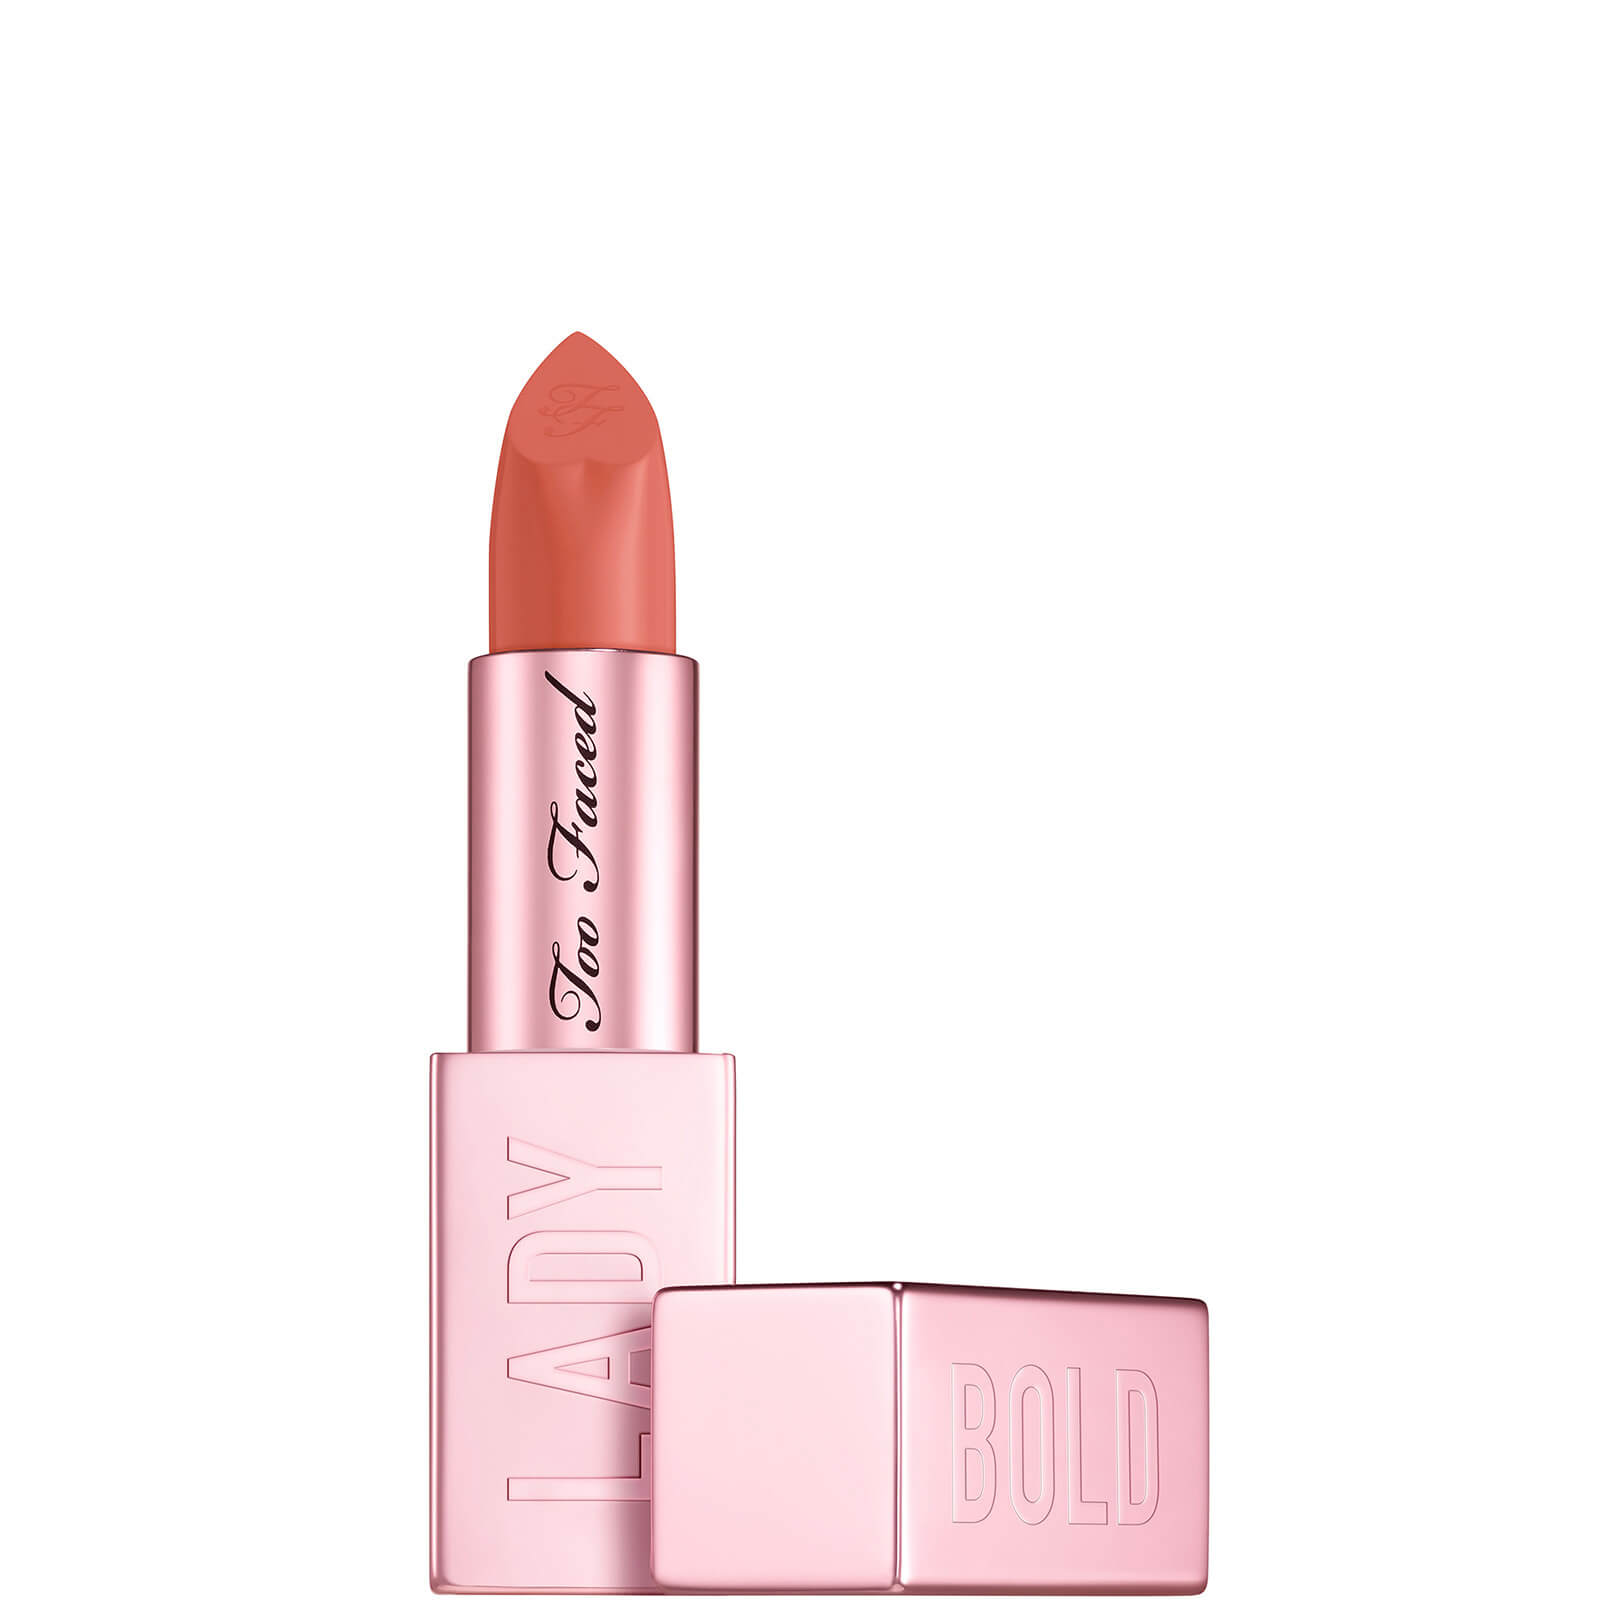 Too Faced Lady Bold Em-Power Pigment Lipstick 4g (Various Shades) - Comeback Queen